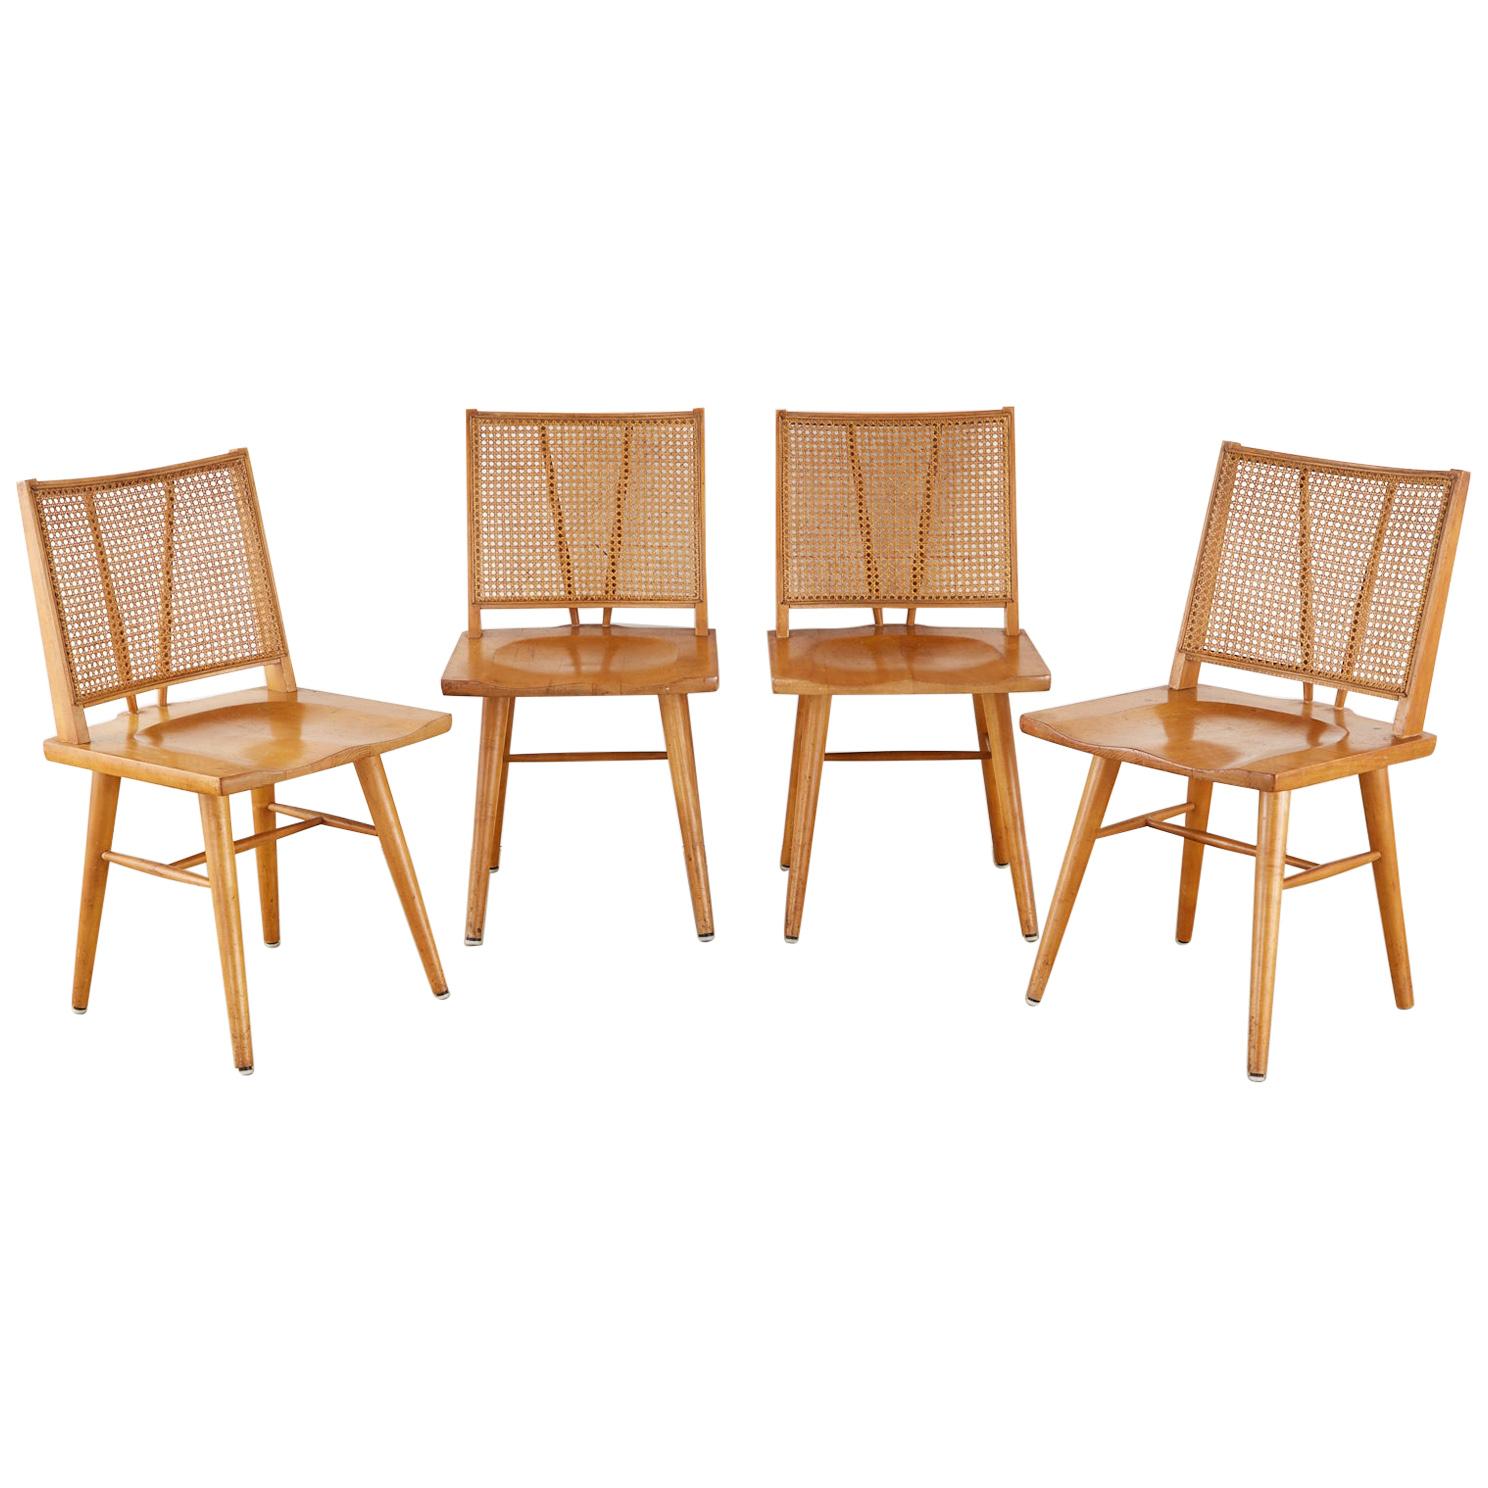 Set of Four Paul McCobb Maple Dining Chairs